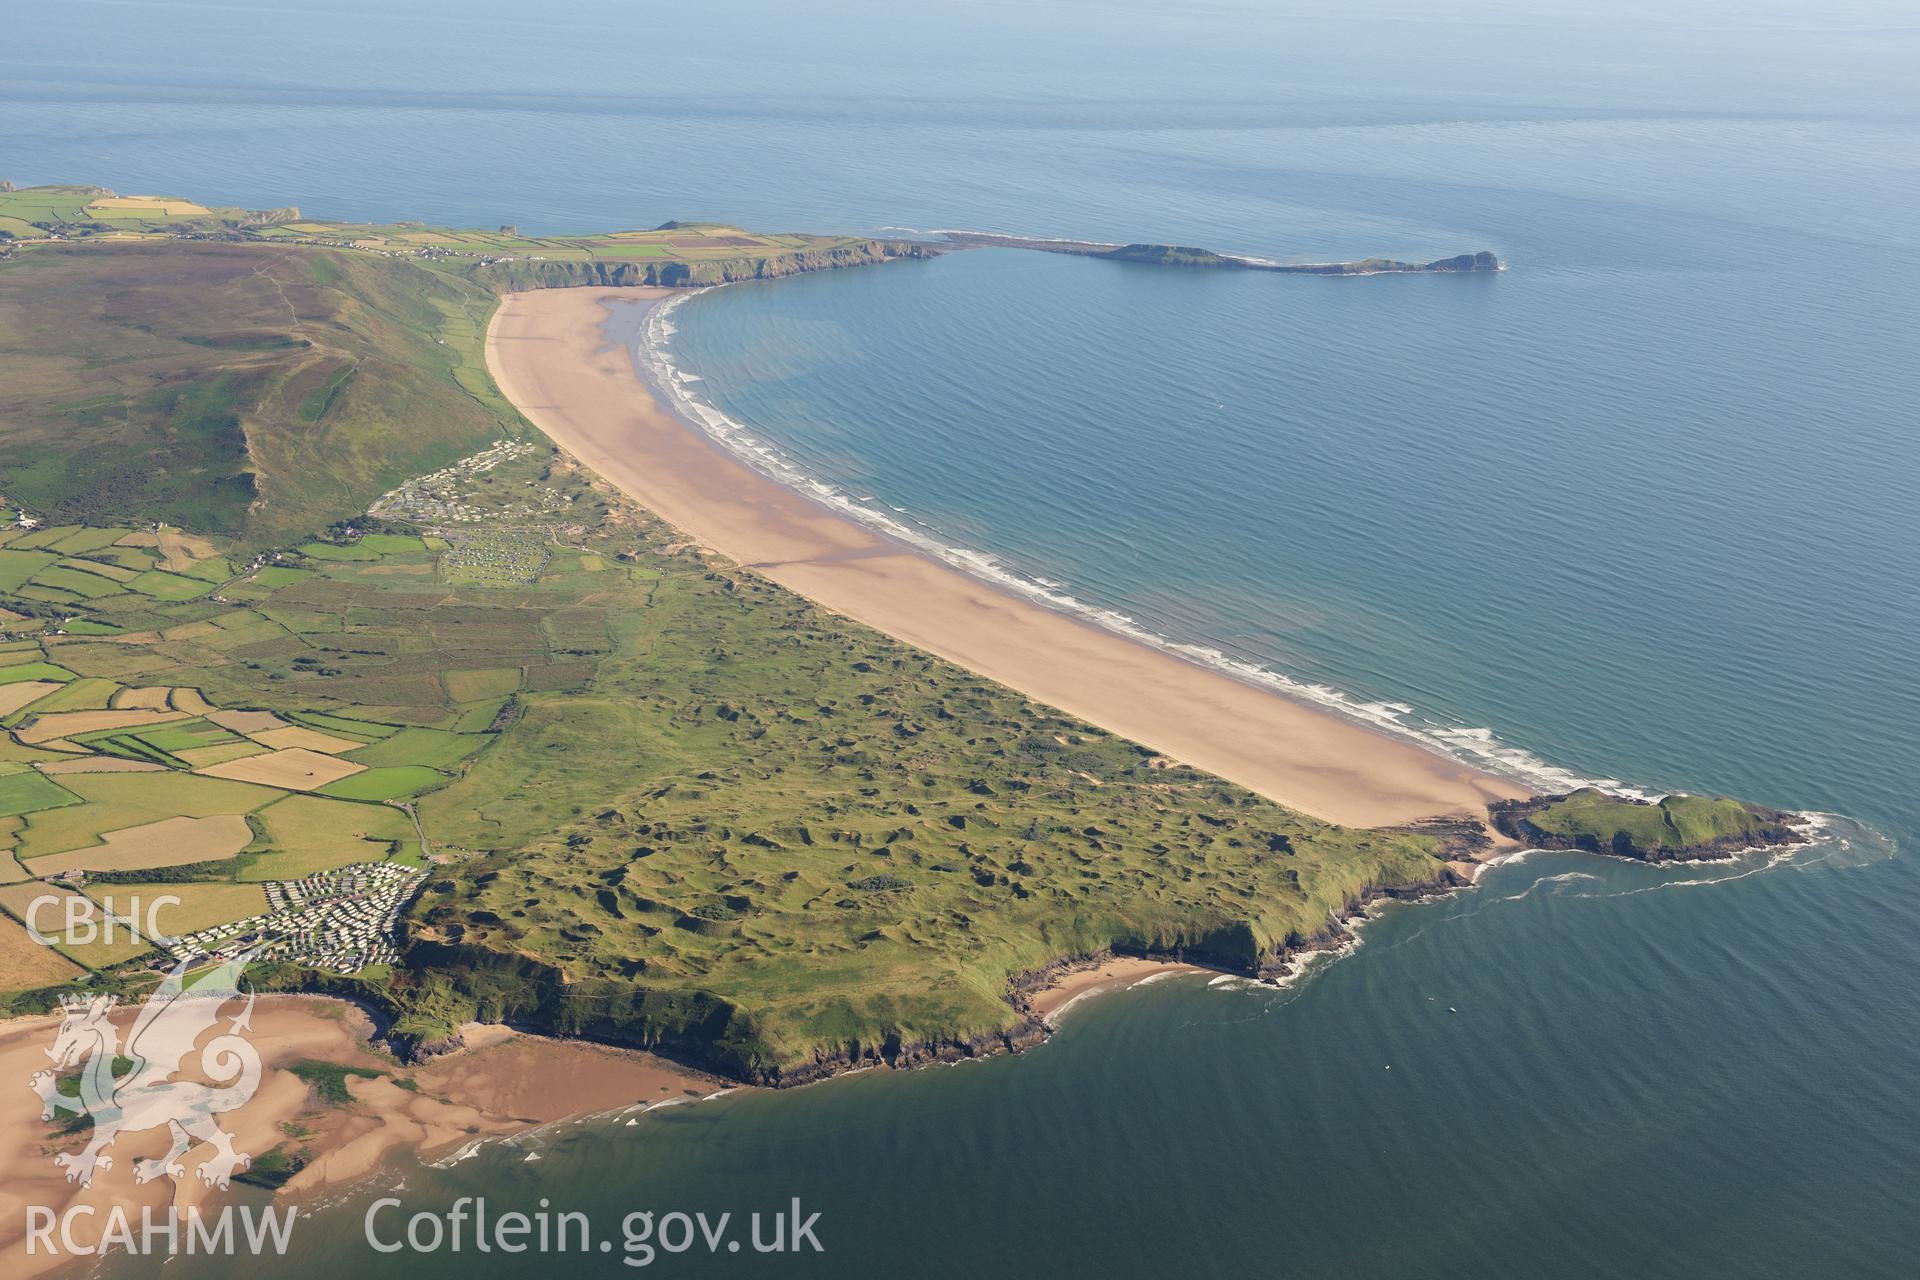 RCAHMW colour oblique photograph of West Gower, high landscape view over Rhossili Bay. Taken by Toby Driver on 24/07/2012.